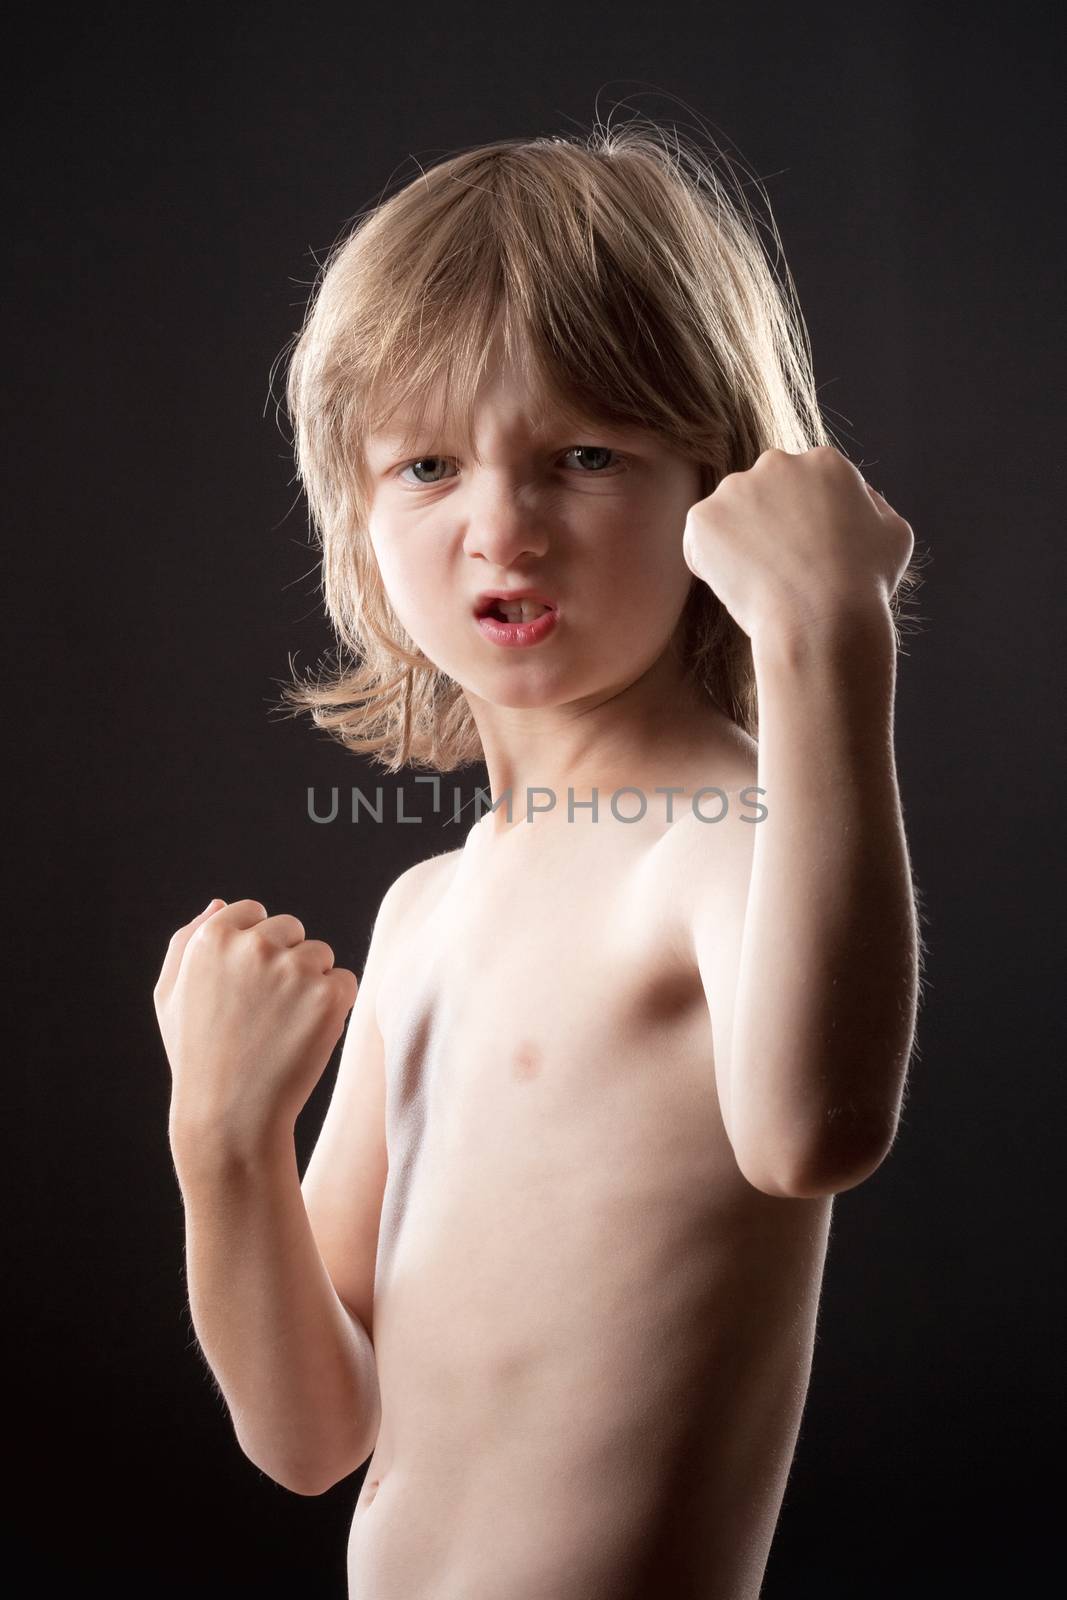 Boy with Blond Hair Striking a Fighting Pose